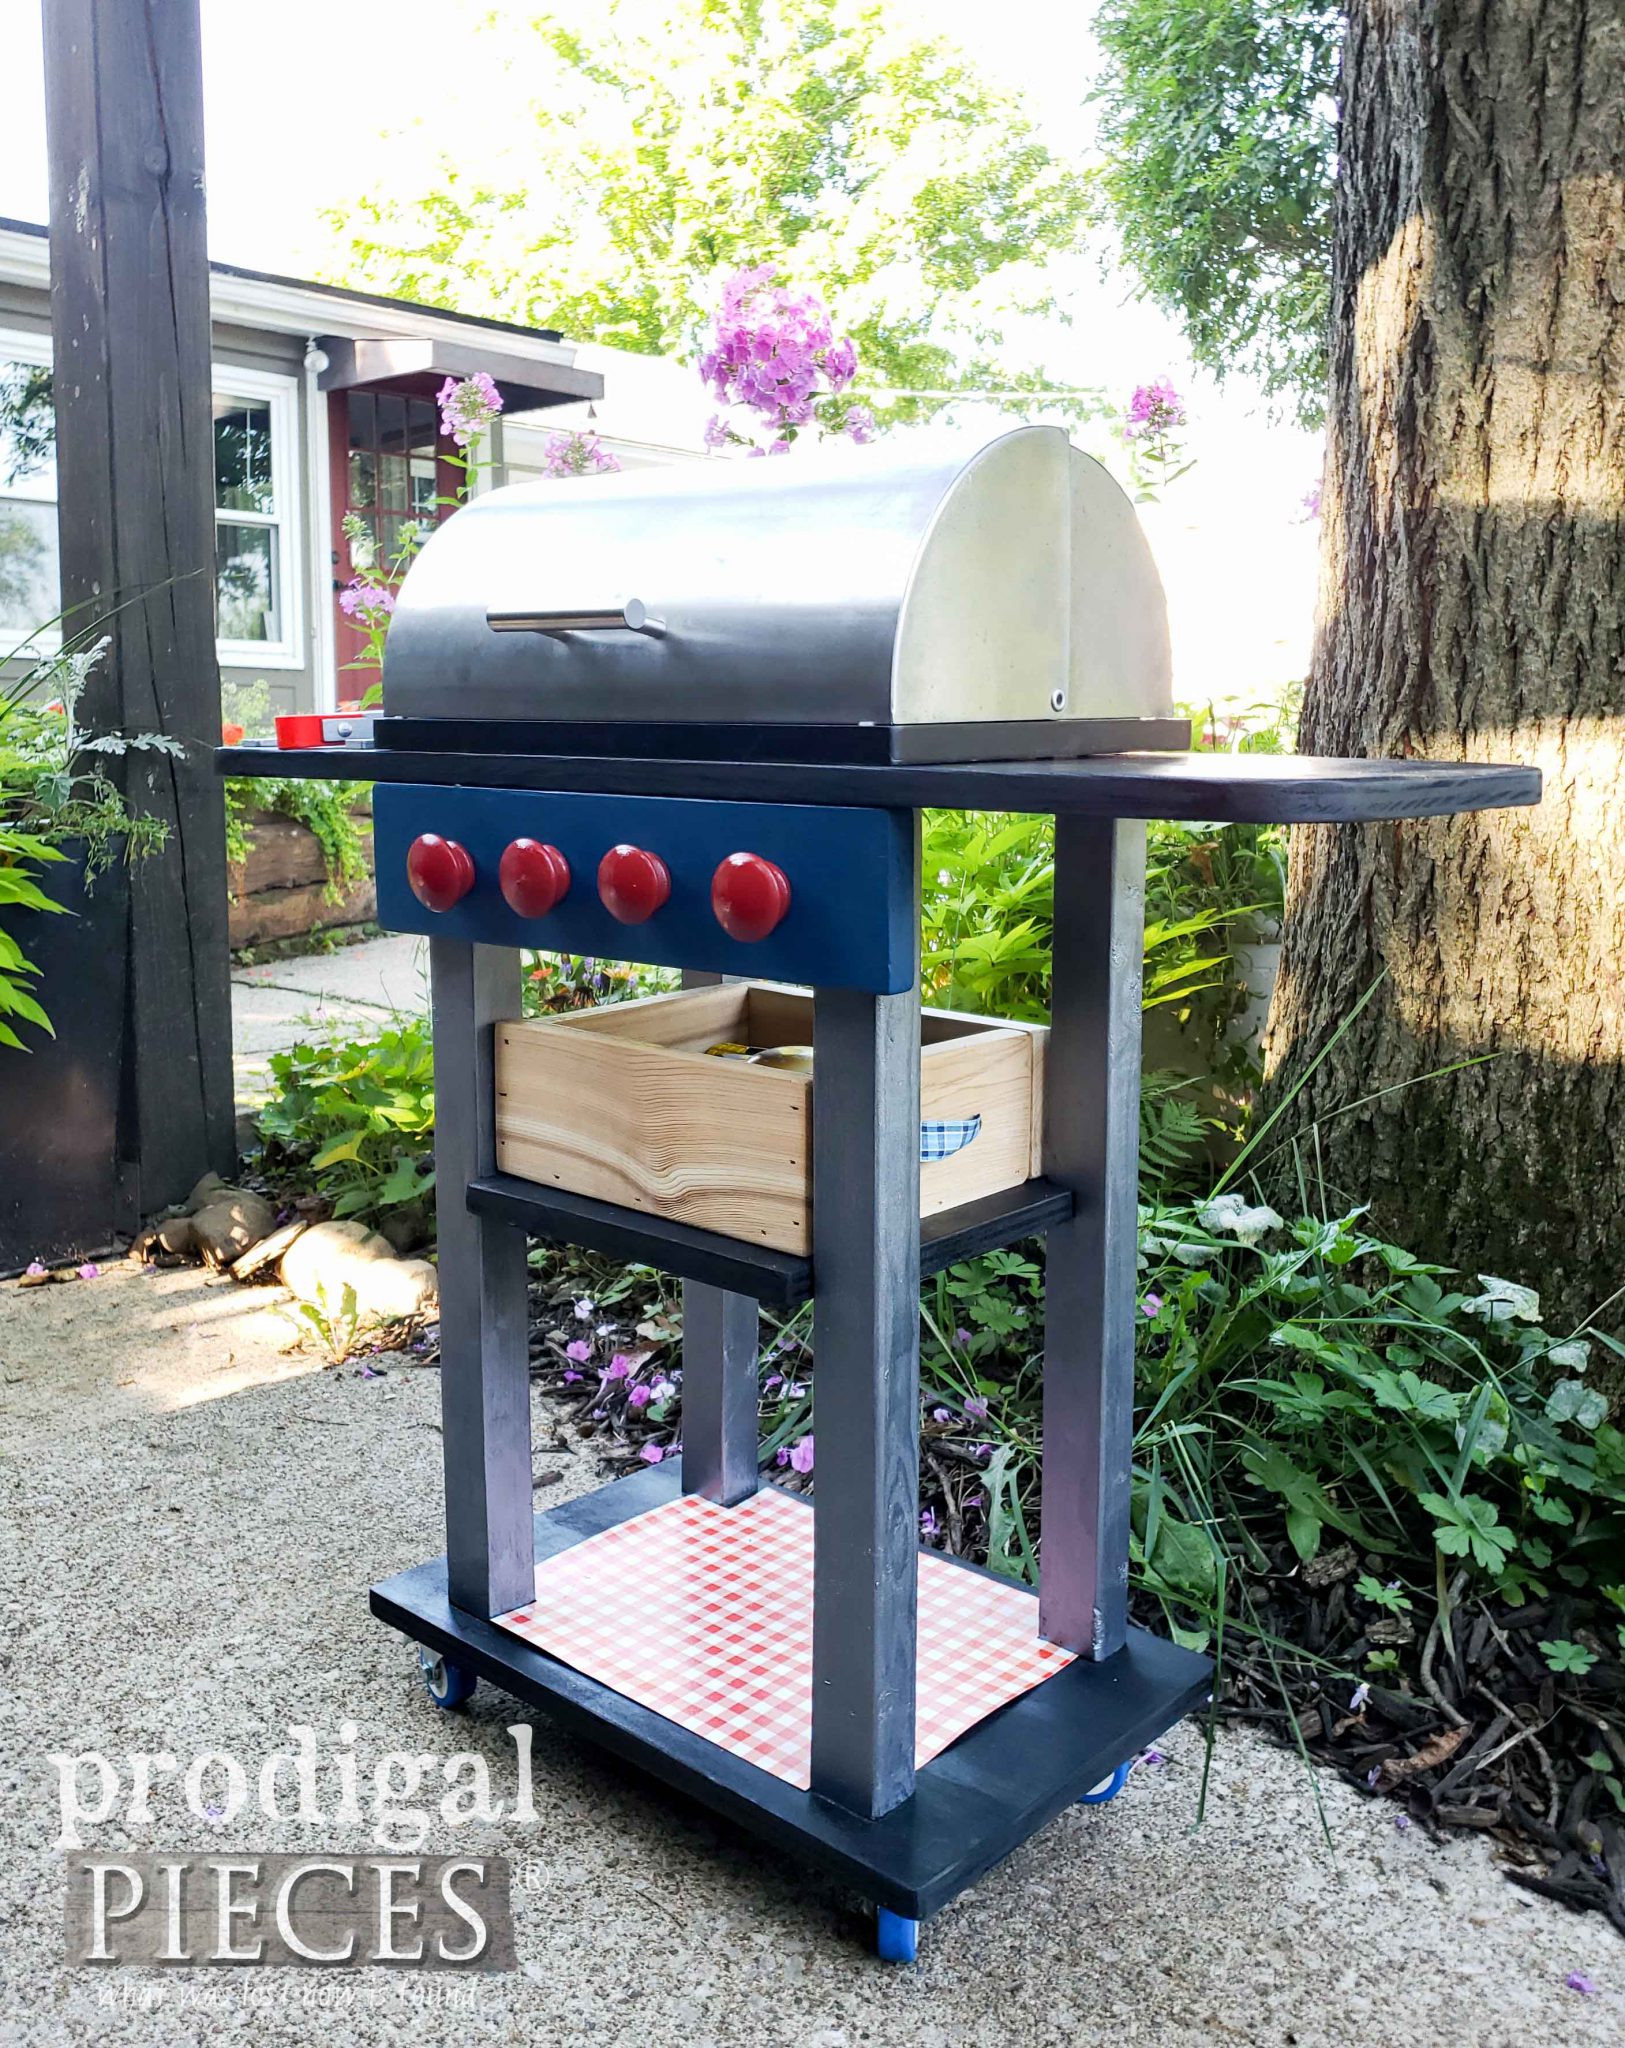 Miniature Pretend Play Grill Set with Wooden Food by Larissa of Prodigal Pieces | prodigalpieces.com #prodigalpieces #handmade #home #toys #kids #pretend